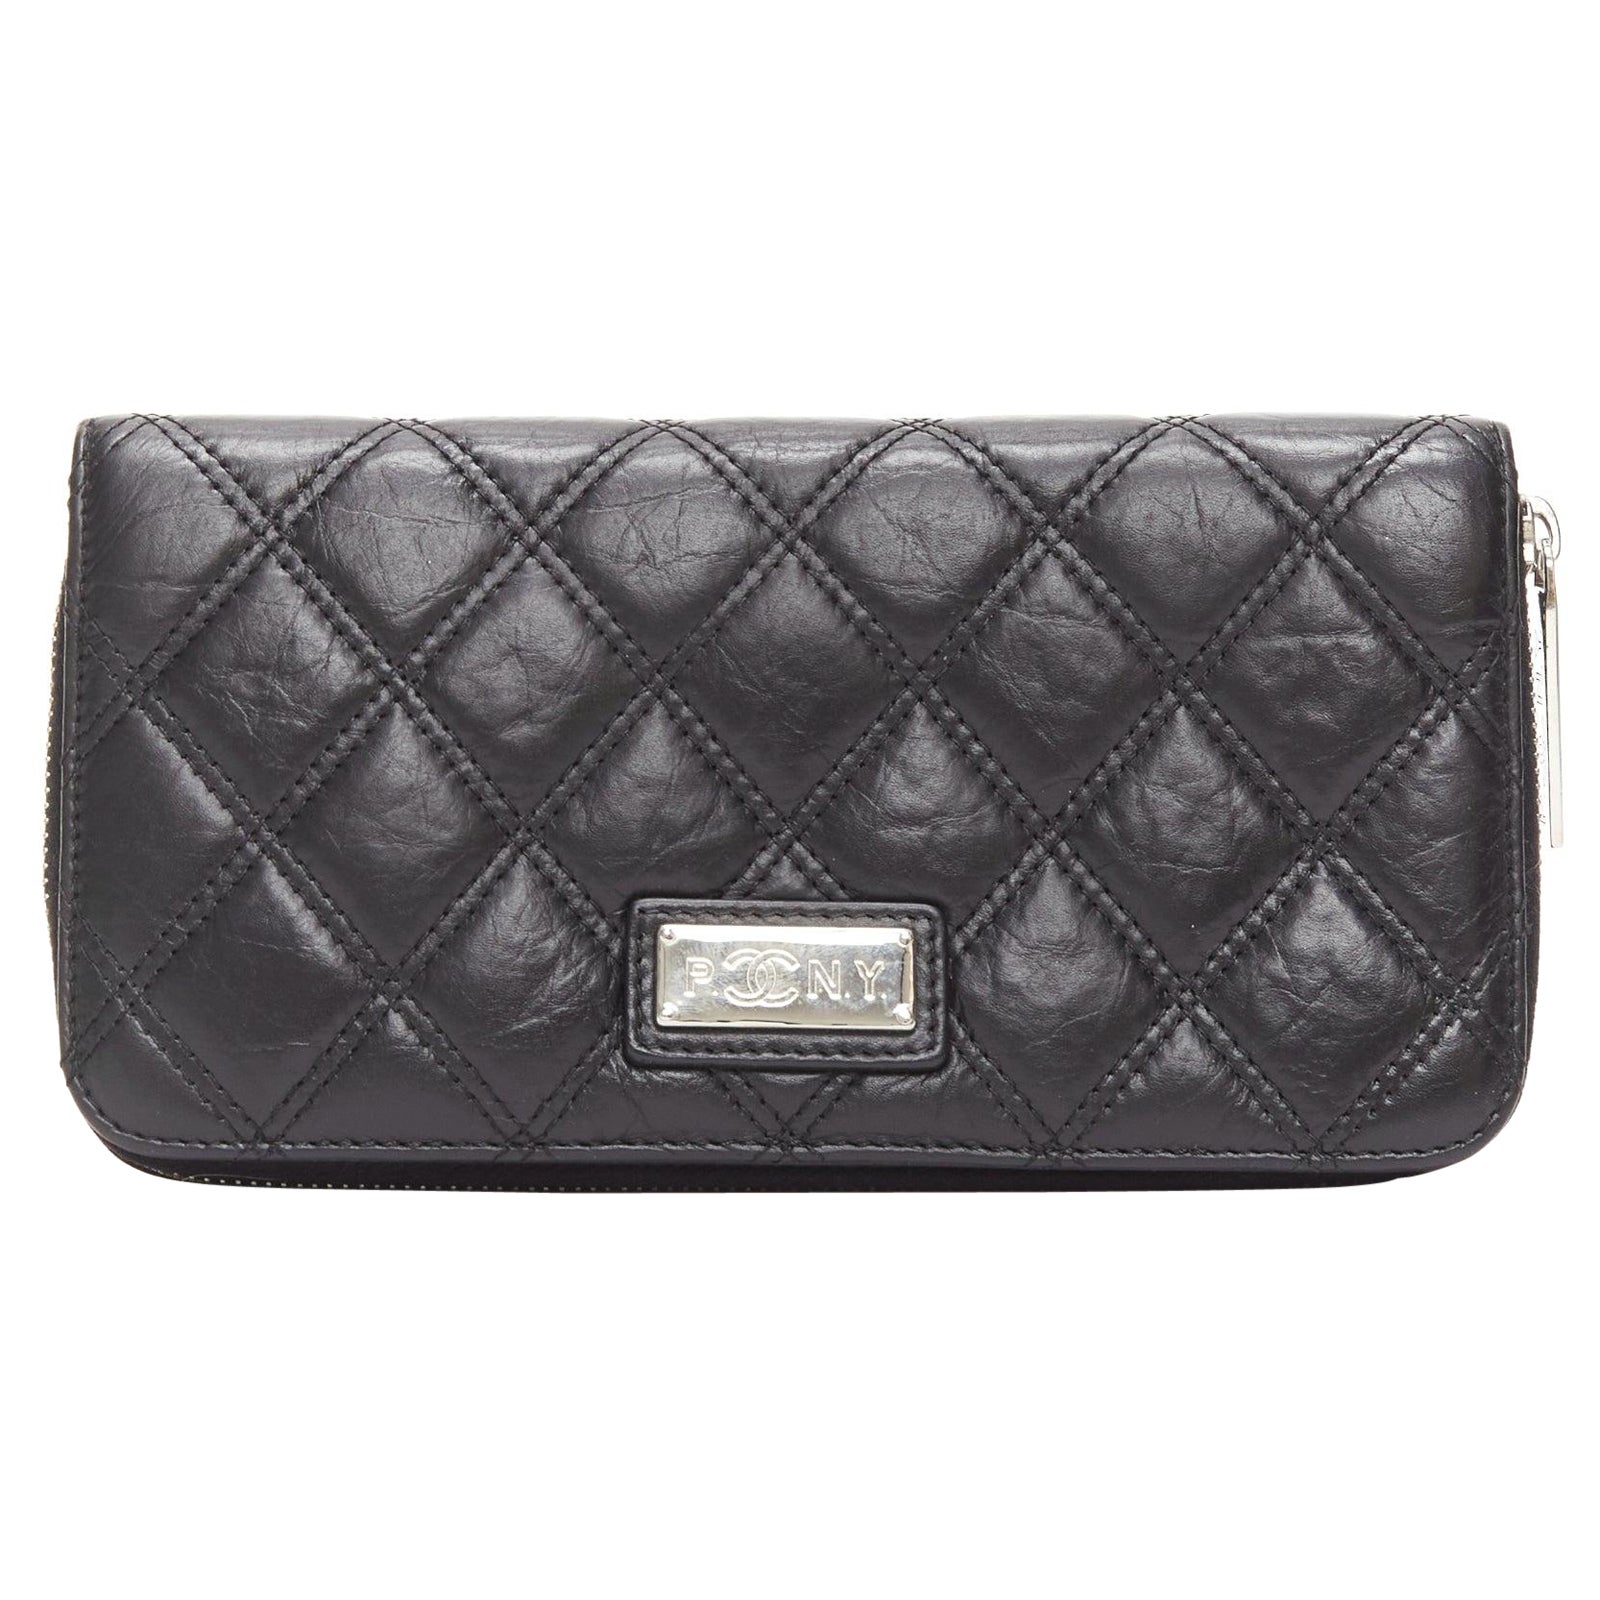 CHANEL Paris New York black quilted leather silver logo long zip wallet For Sale